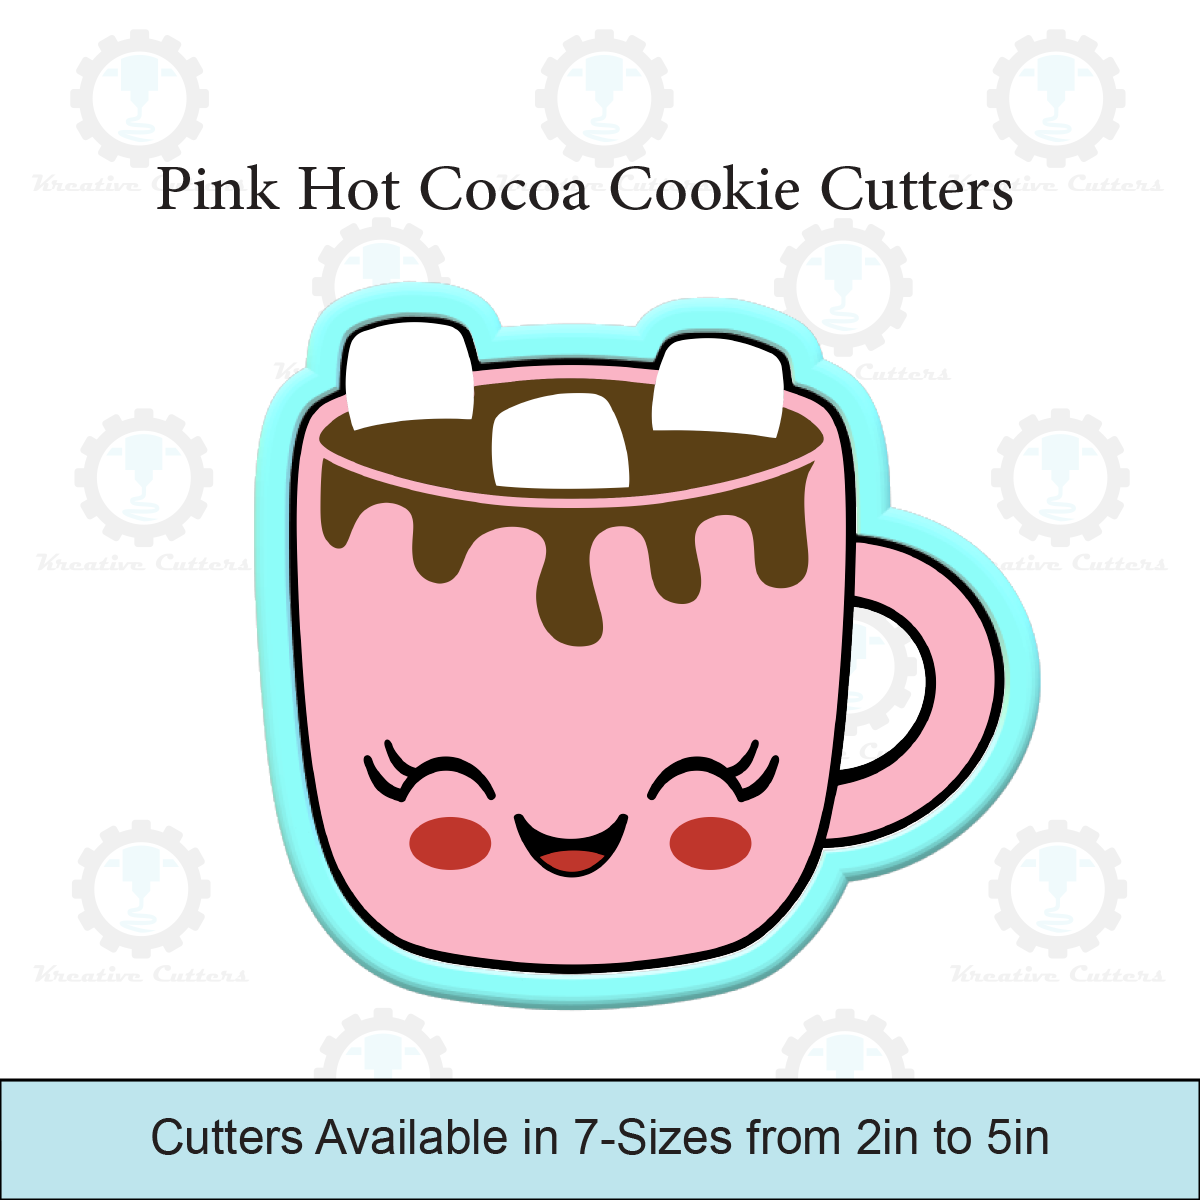 Pink Hot Cocoa Cookie Cutters